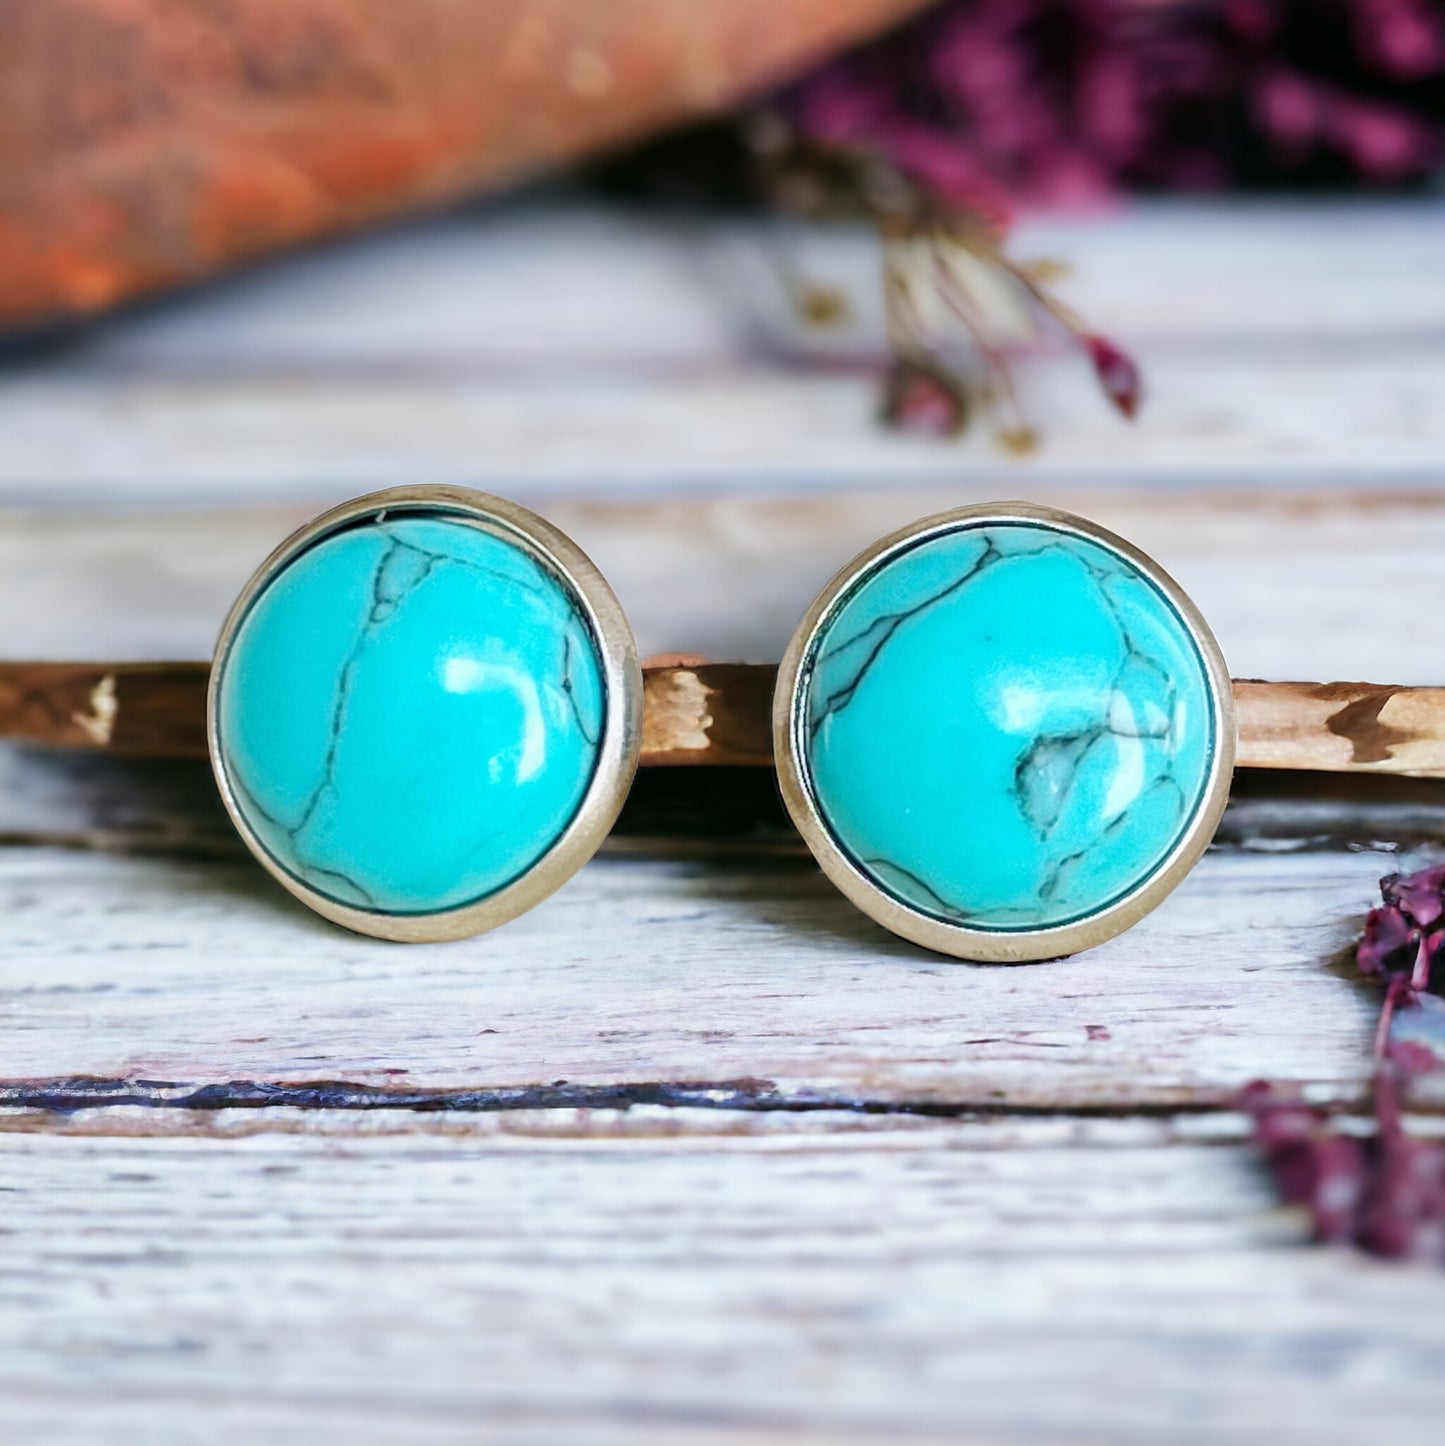 Turquoise 12mm Silver Stud Earrings: Boho Western Chic Accessories